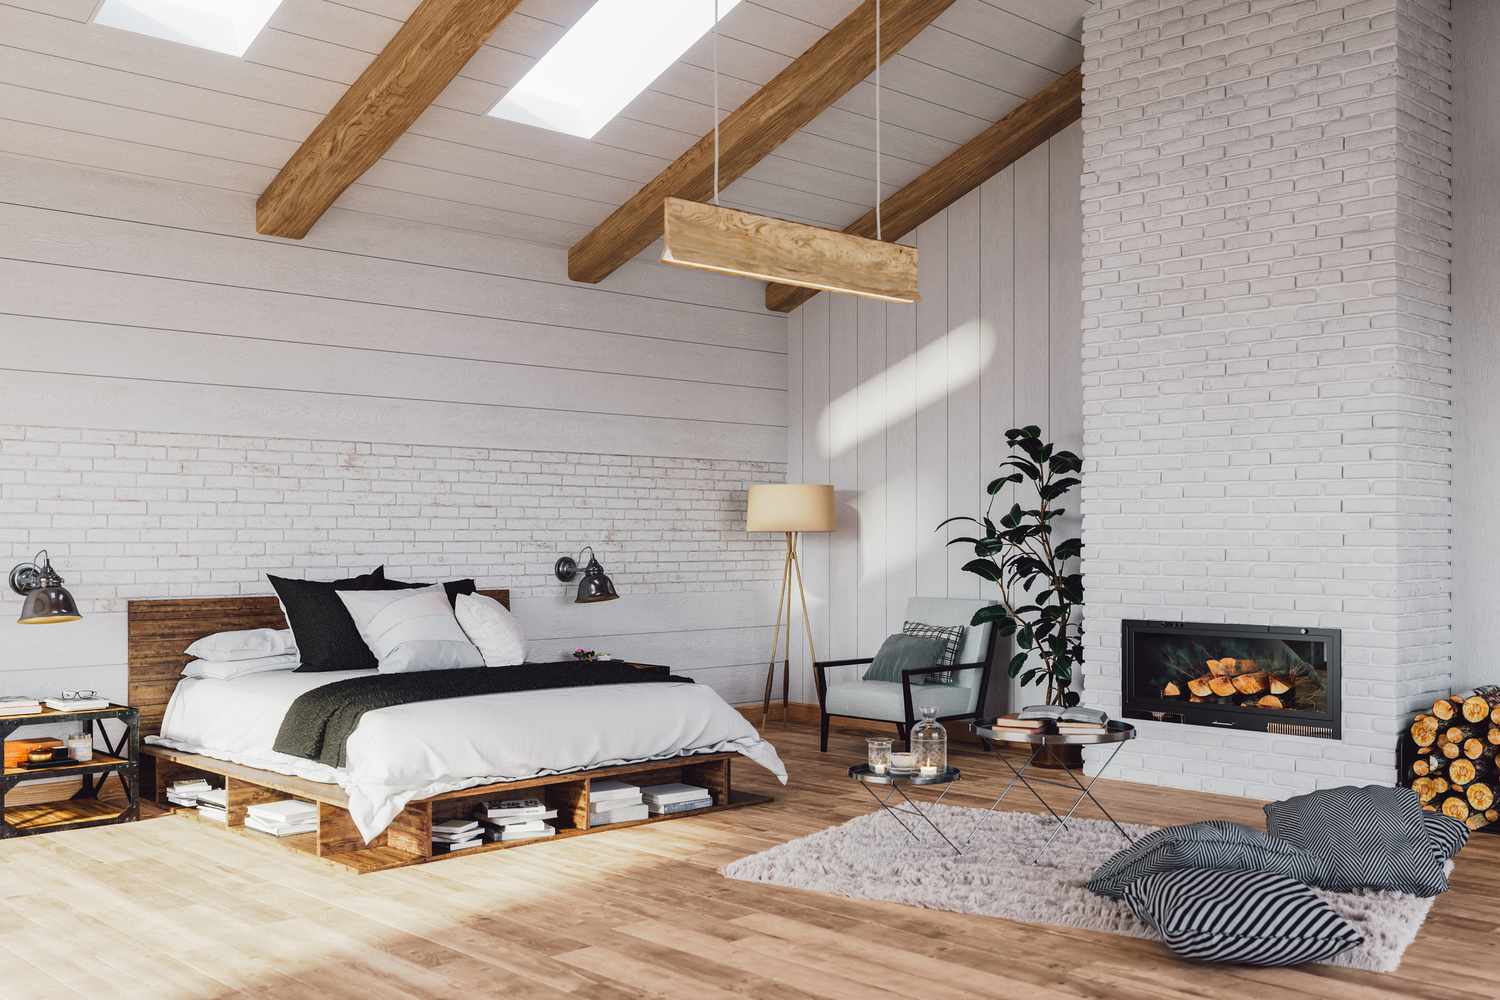 A furnished modern bedroom with a fireplace